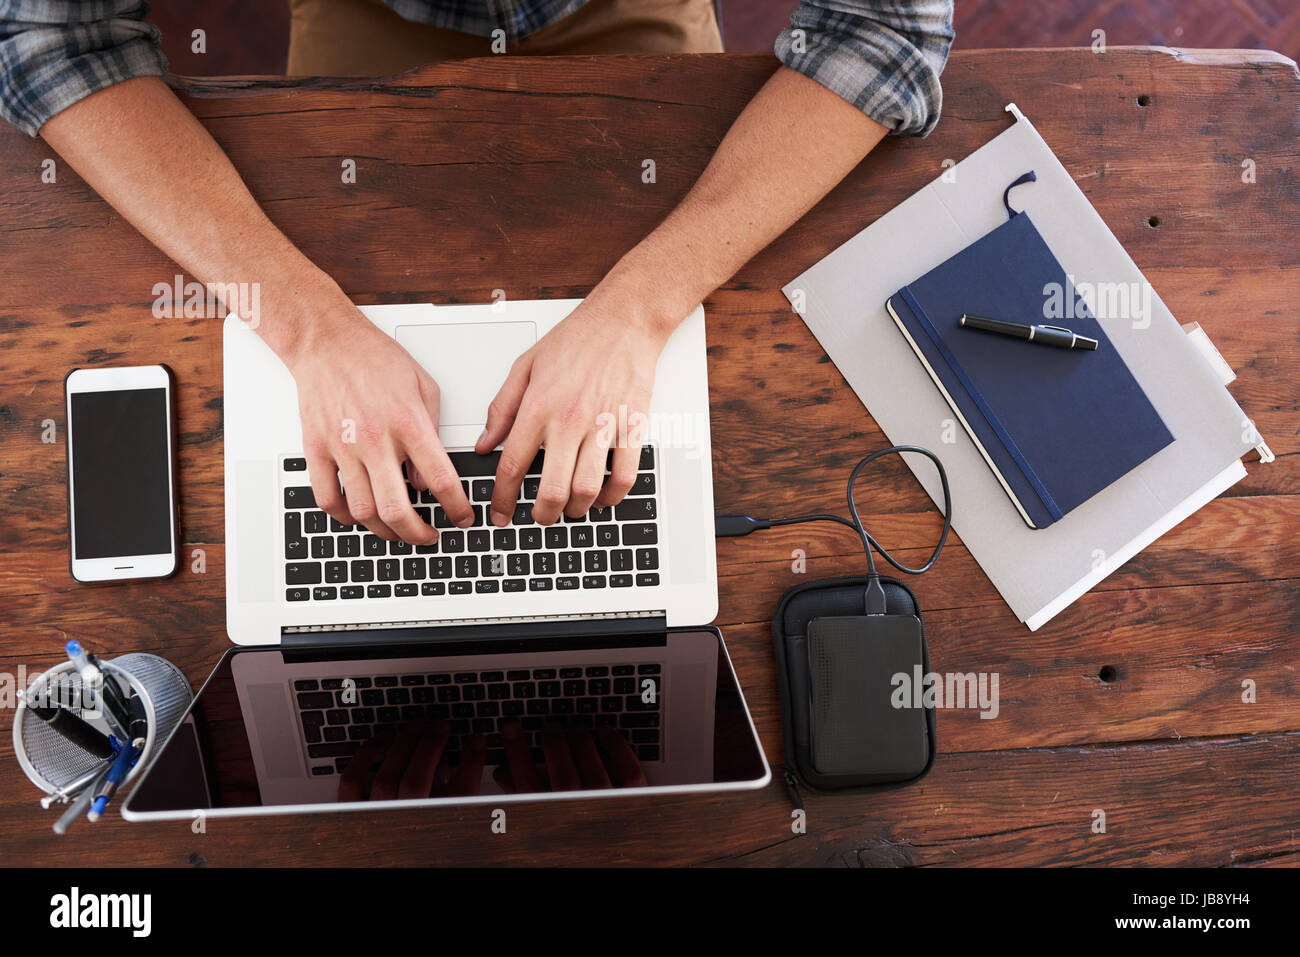 Birds eye view of hands typing on a modern notebook, placed on a durable dark wood desk along with some notes, portable storage, a pen holder and a mo Stock Photo